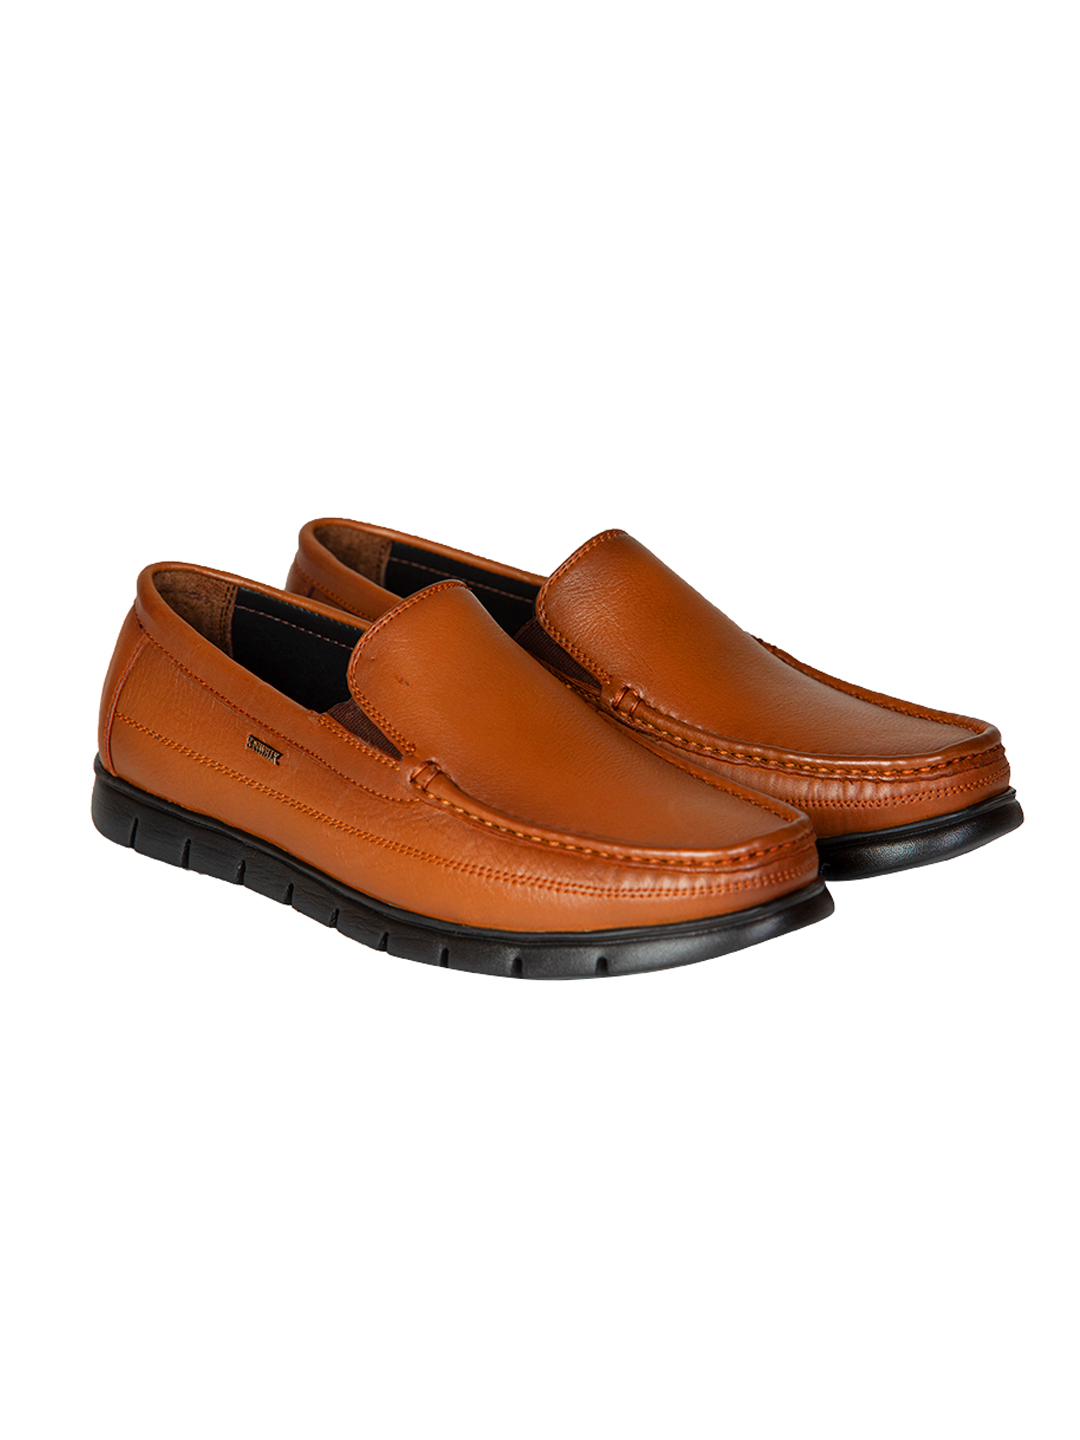 Buy Von Wellx Germany Comfort Tan Zion Shoes Online in Kanpur